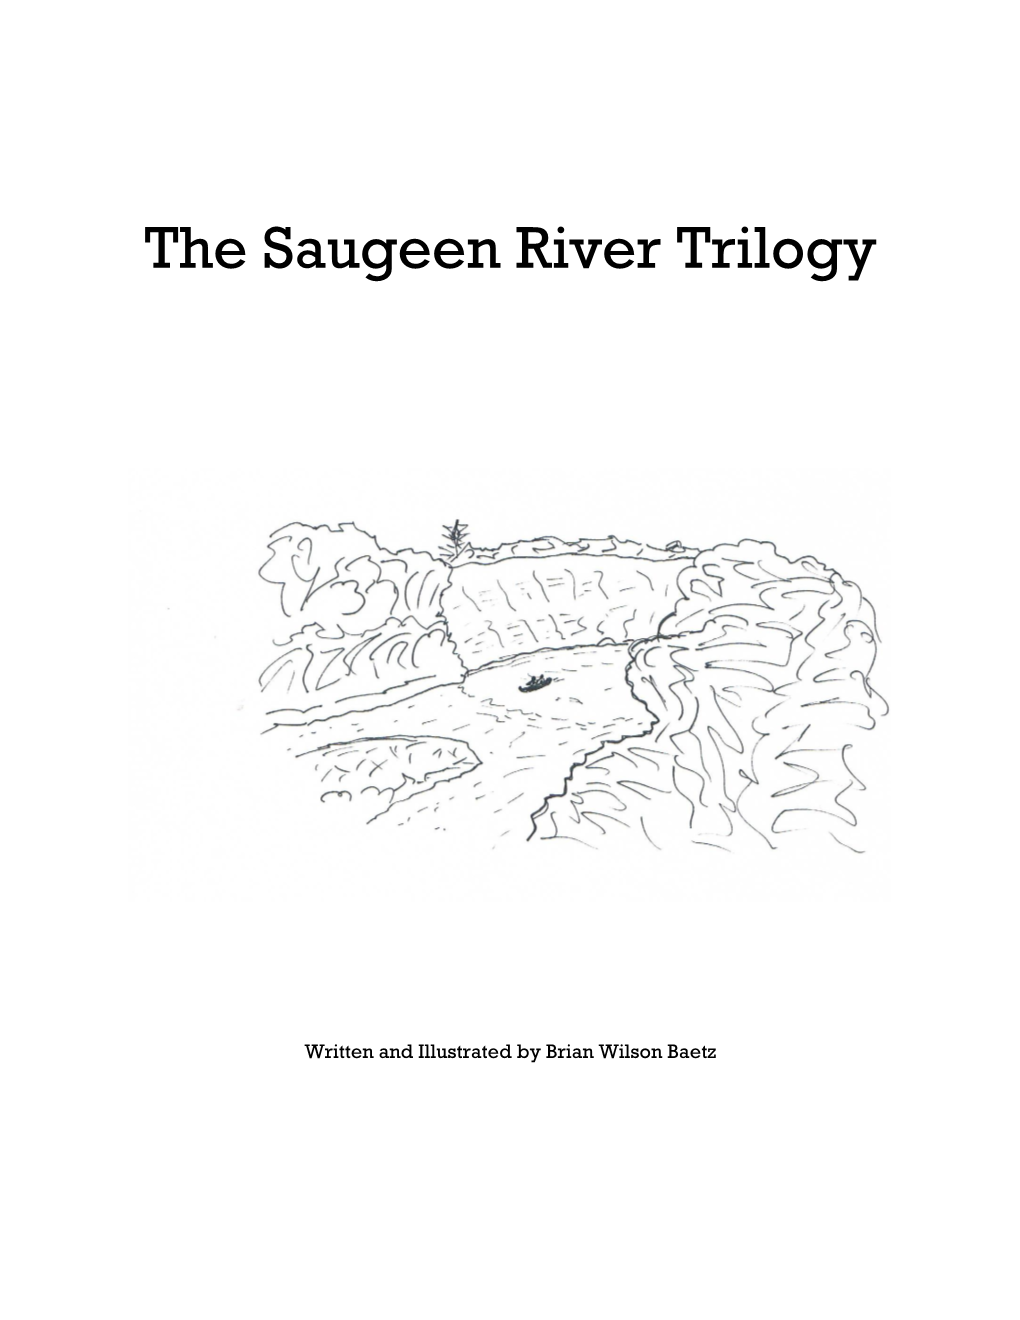 The Saugeen River Trilogy